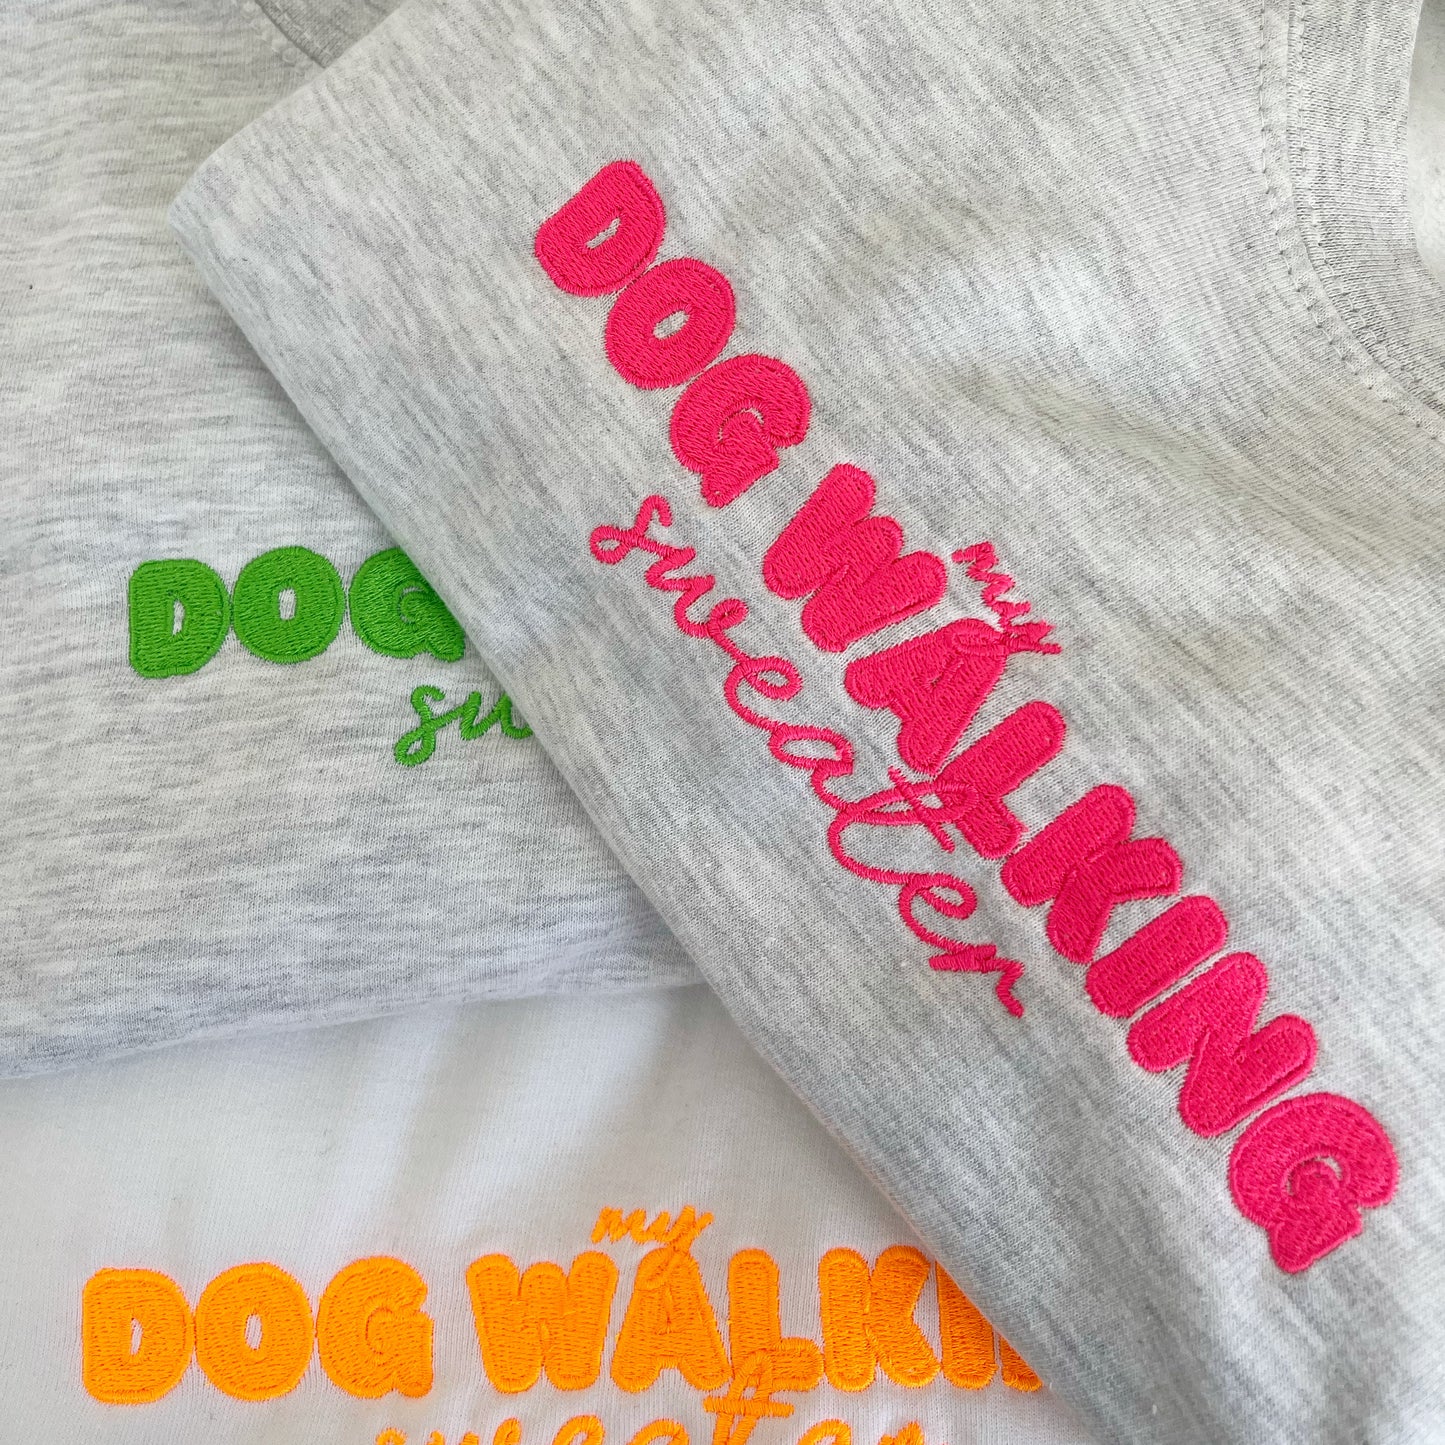 Embroidered My Dog Walking Sweater: Summer Edition